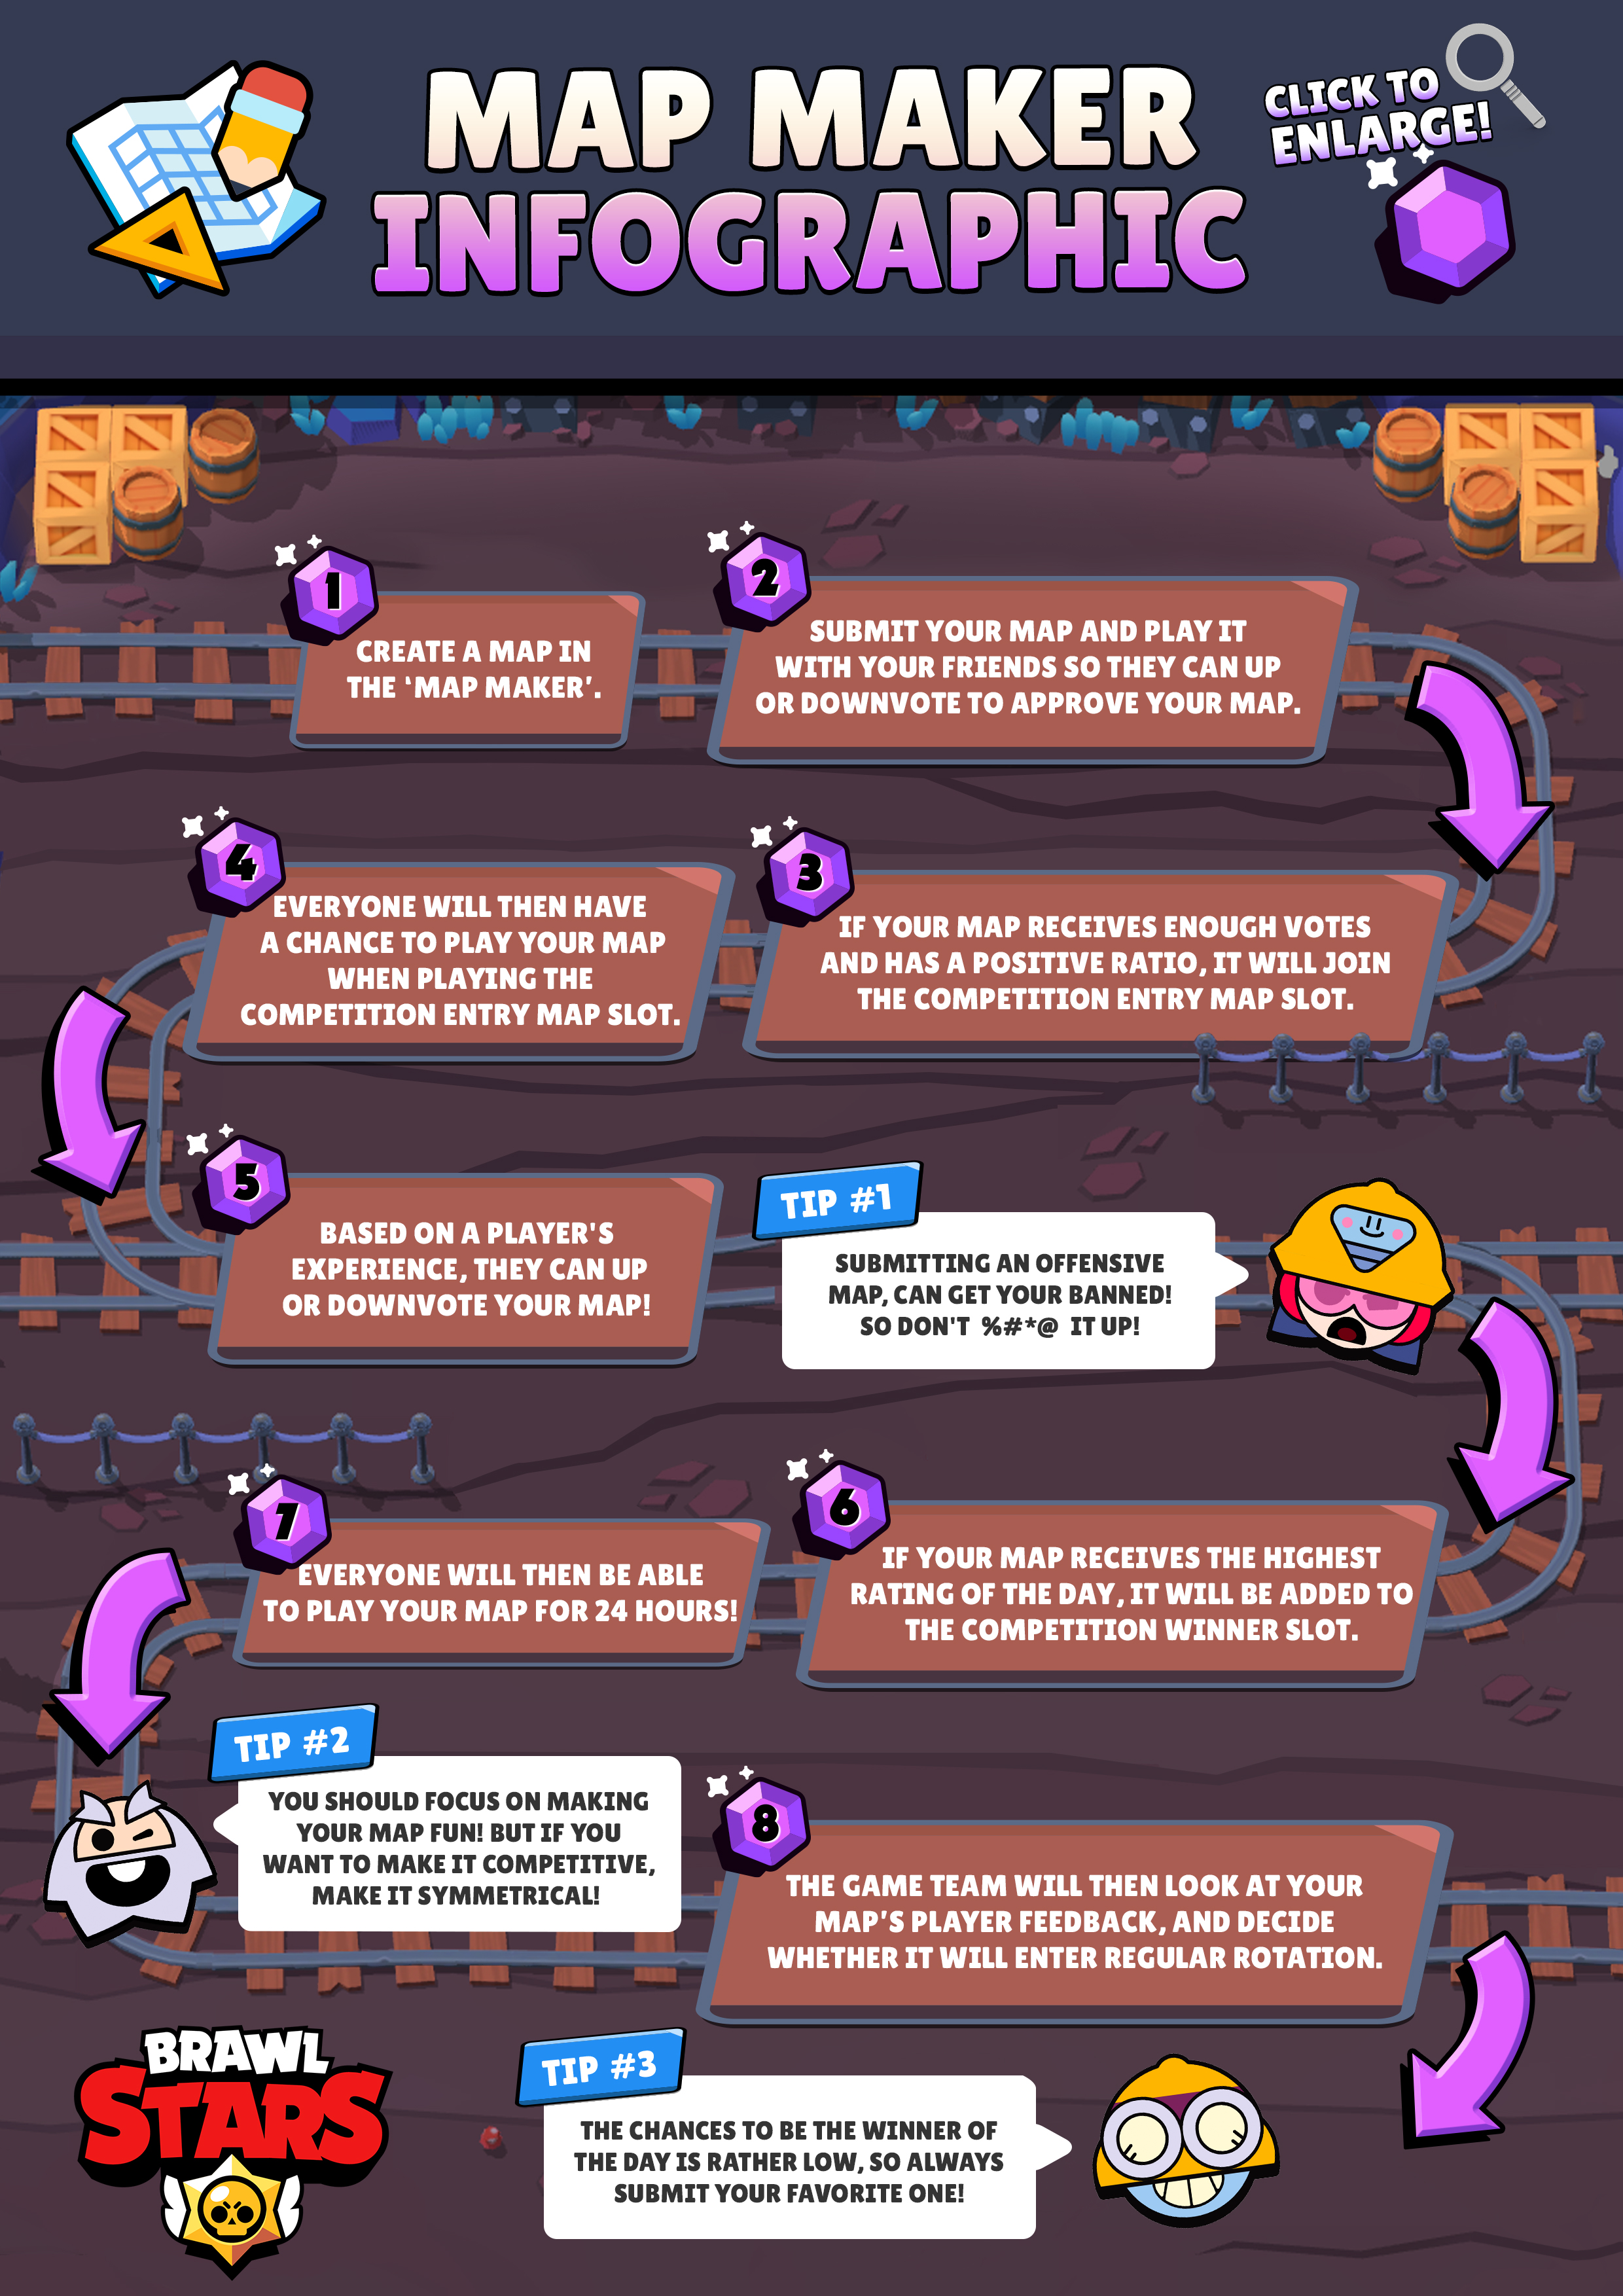 Brawl Stars On Twitter Tap To Open The Image You Will Soon Be Able To Play New Maps Every Day Made By You And Other Players Here S How It S Going - brawl star mapas